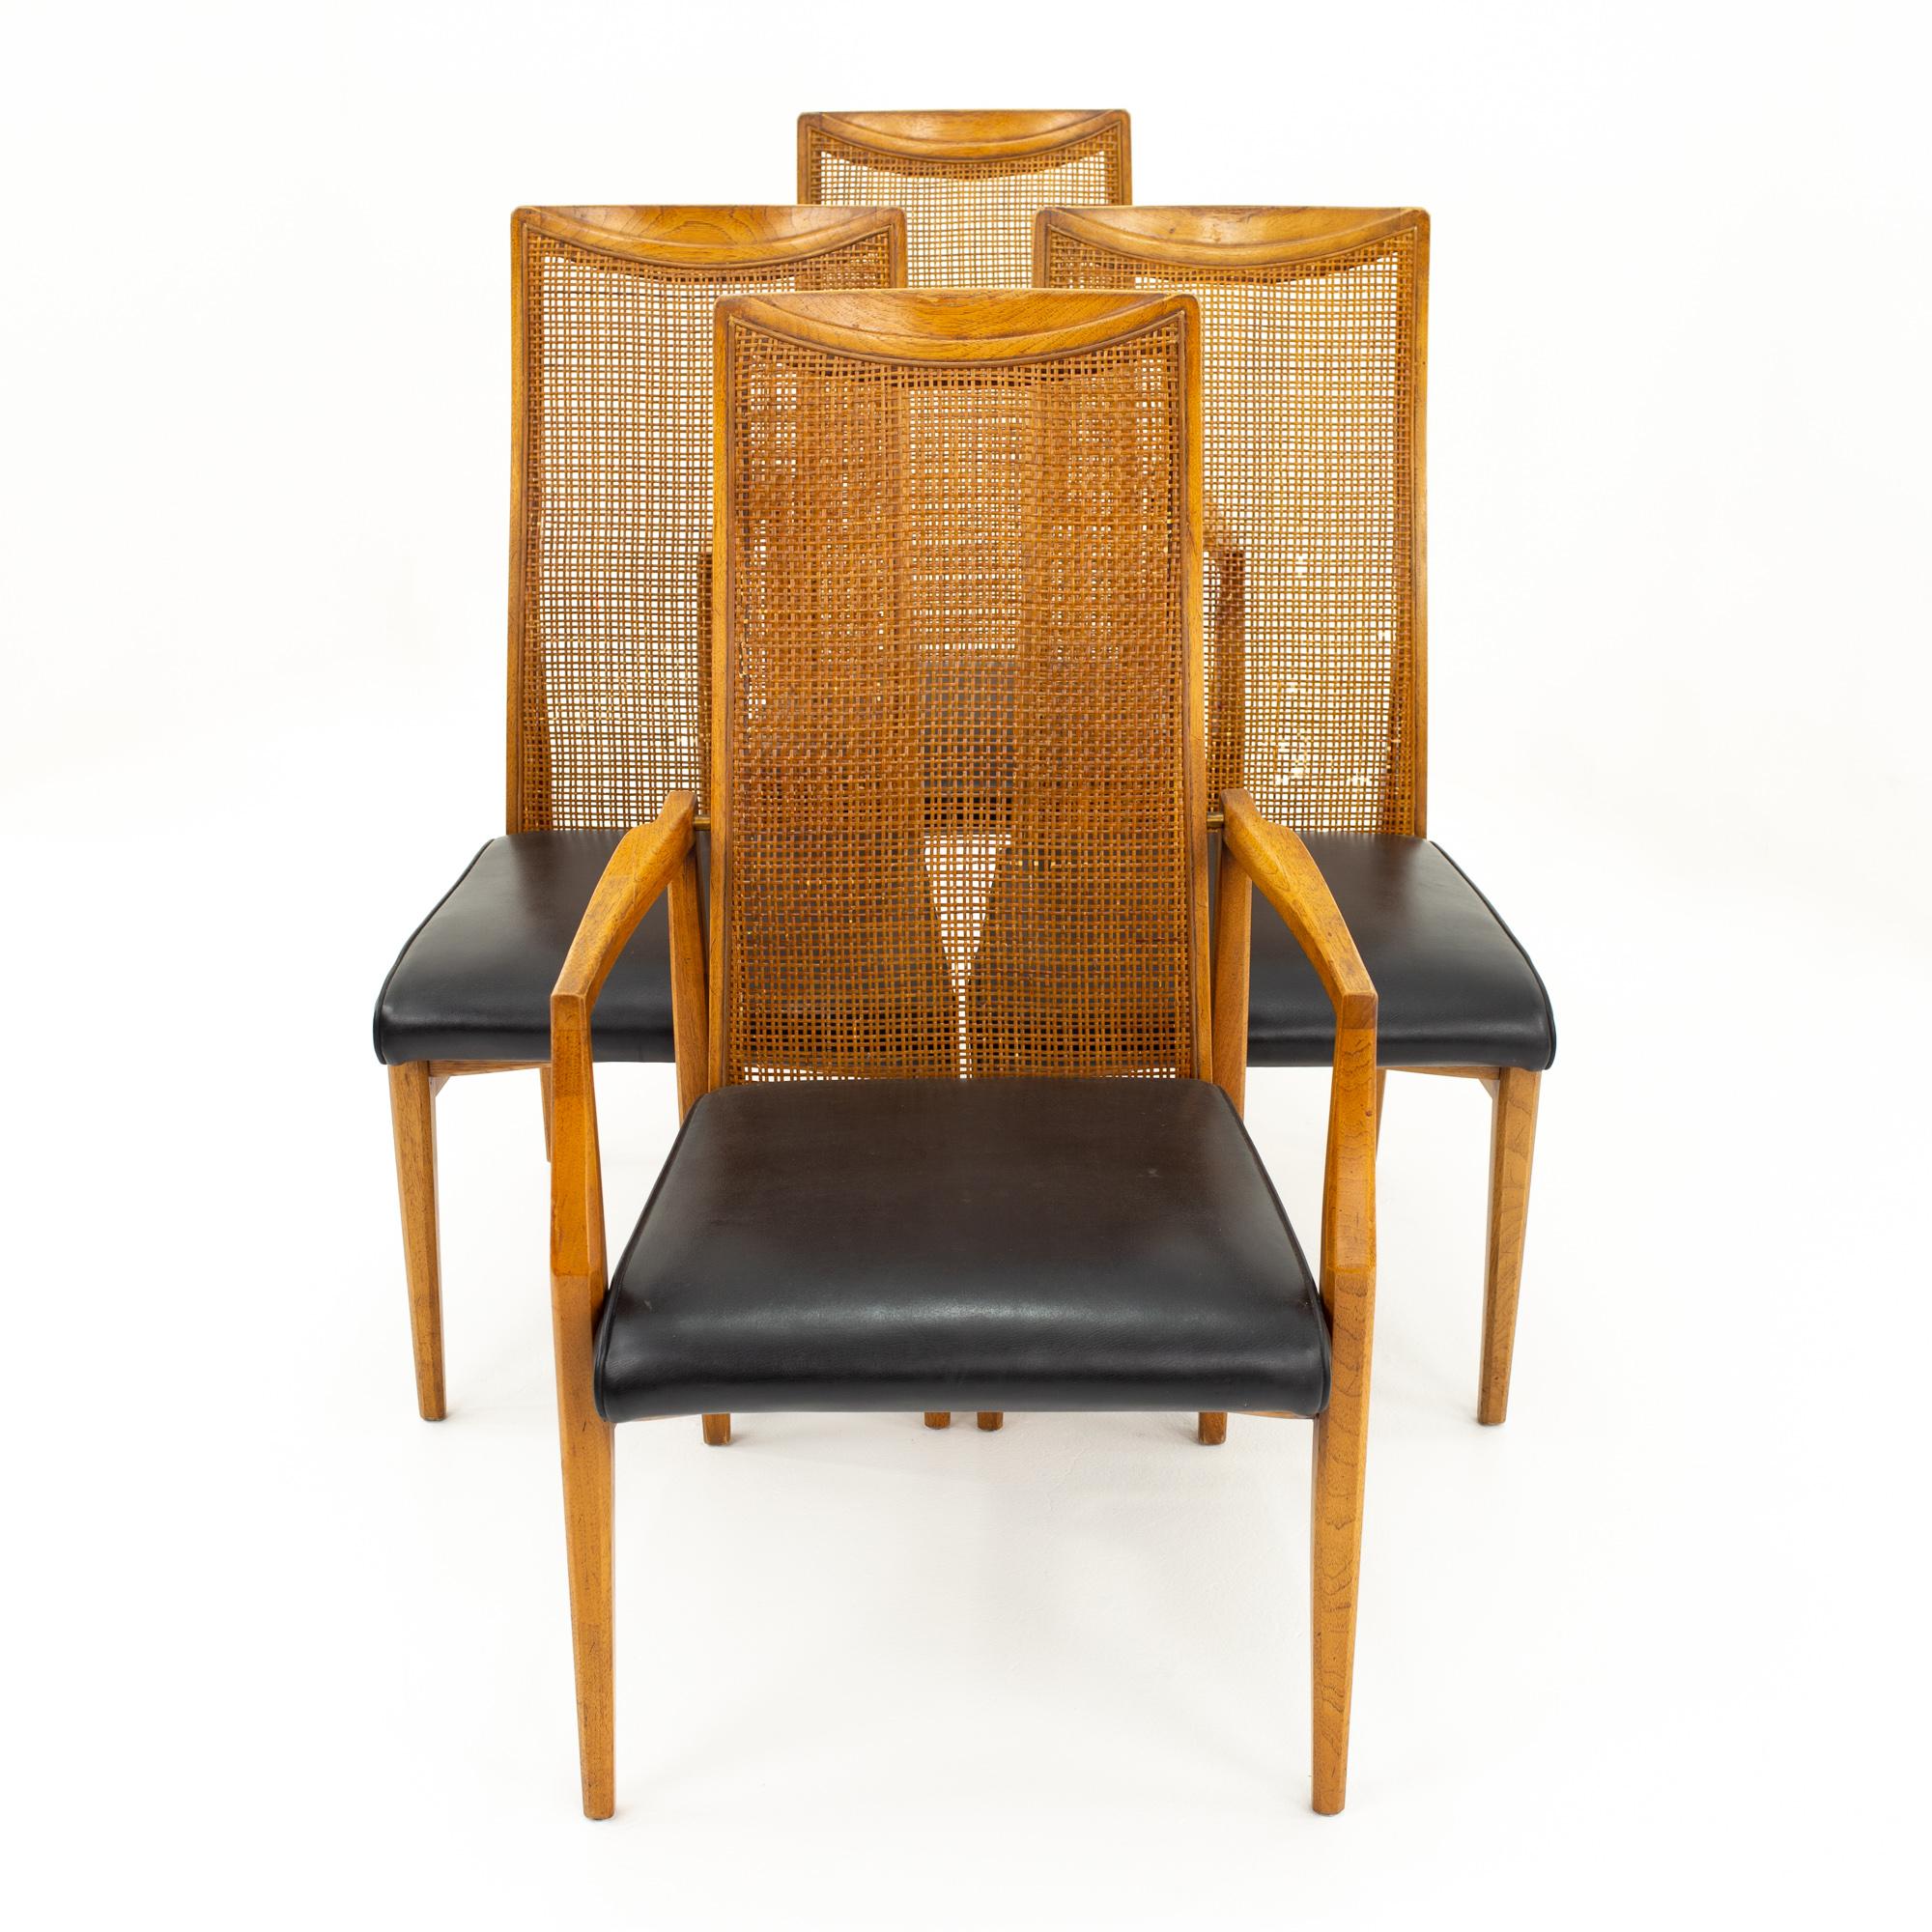 Drexel Mid Century dining chairs - set of 4

Each chair measures: 20.5 wide x 21 deep x 40 high with a seat height of 18 inches

This price includes getting this set in what we call restored vintage condition. Upon purchase it is fixed so it’s free